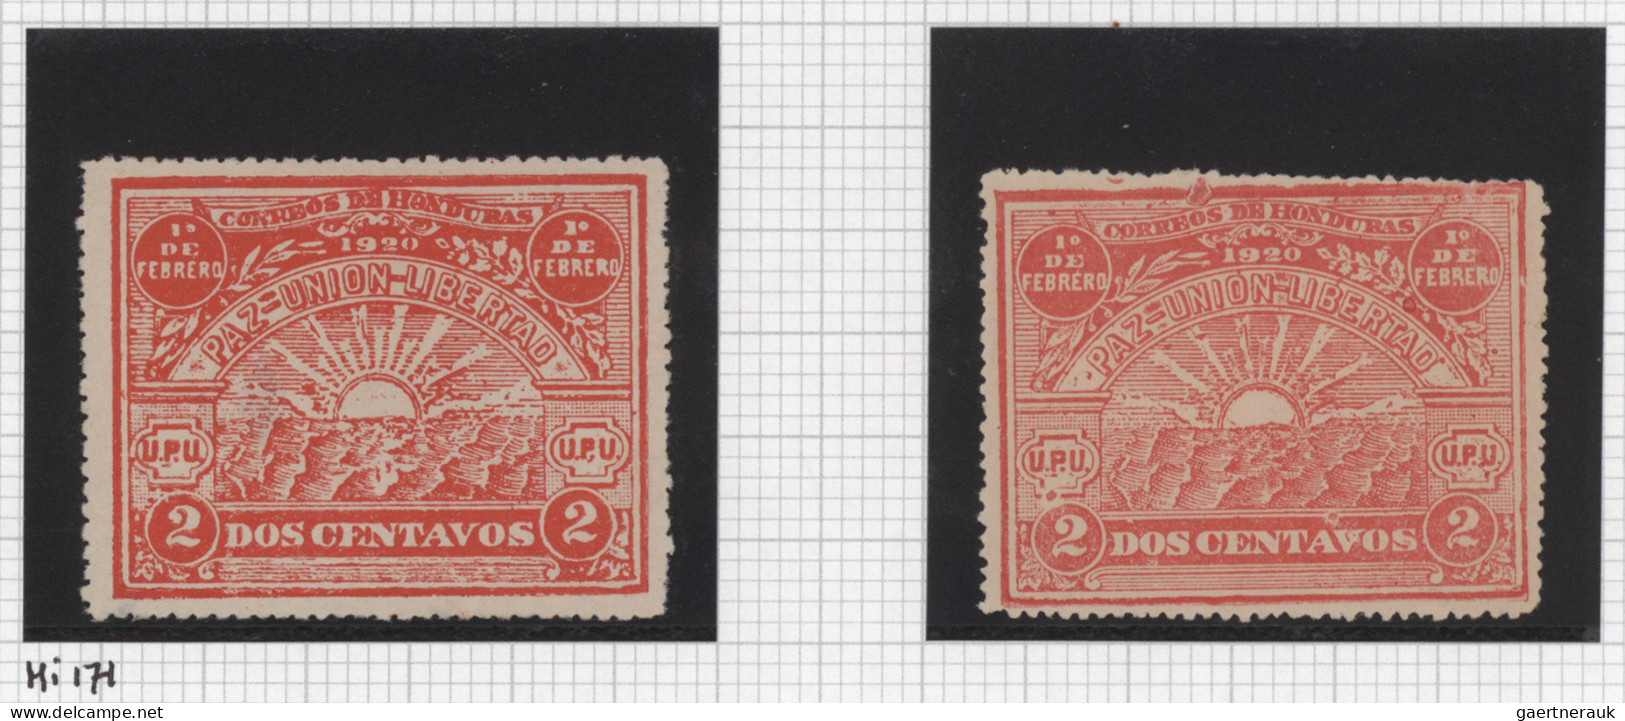 Honduras: 1903/1940 (ca.), comprehensive unused and used collection of more than